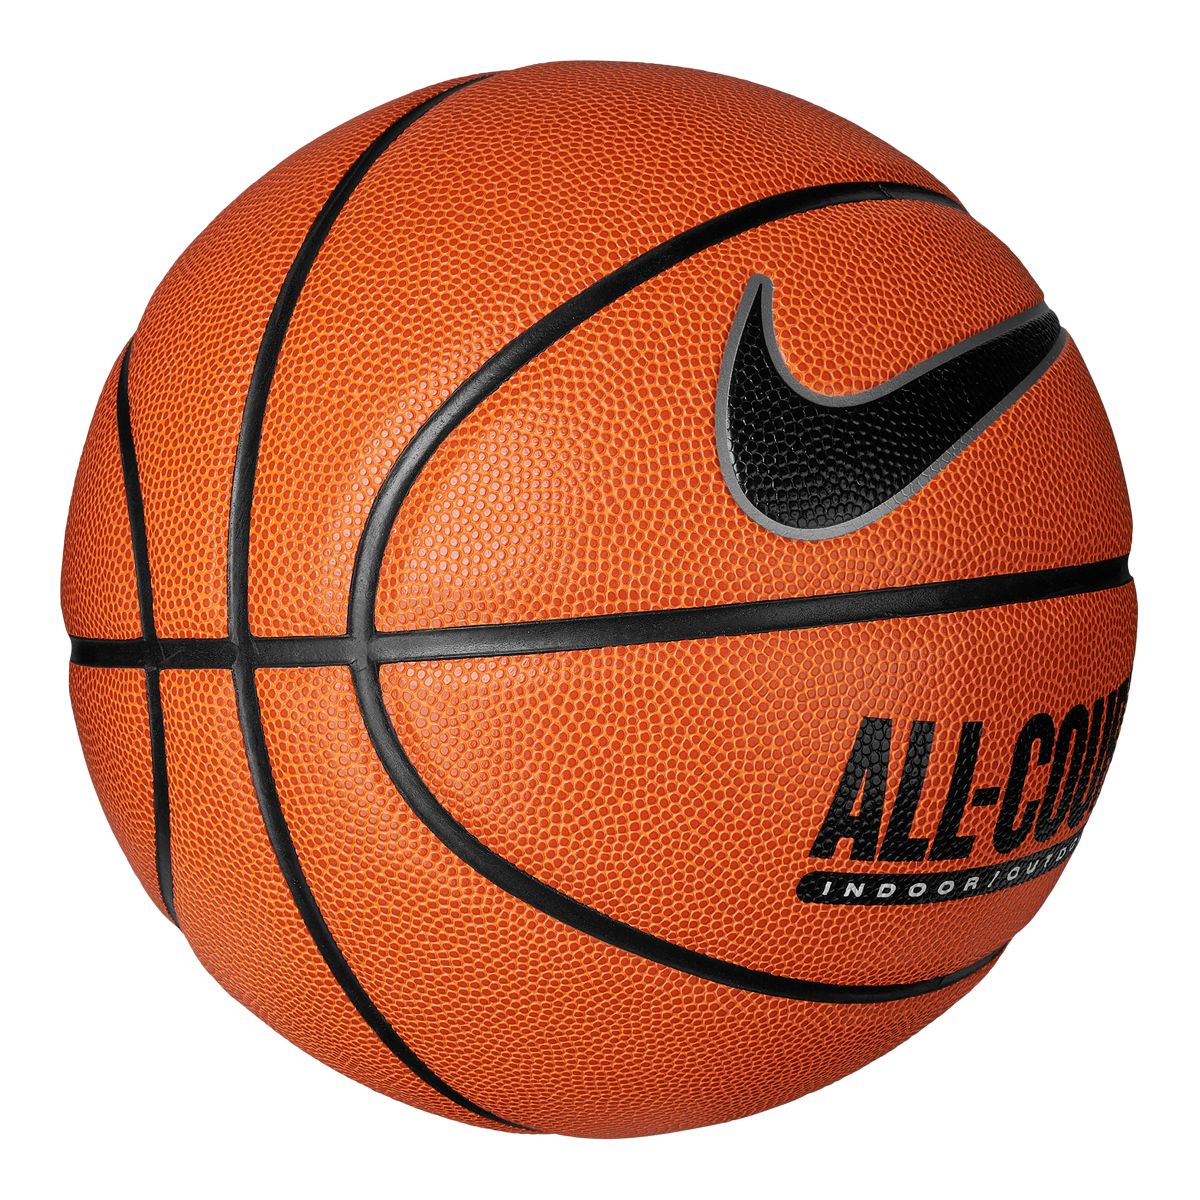 Nike Everyday All Court 8P Graphic Basketball Ball Yellow